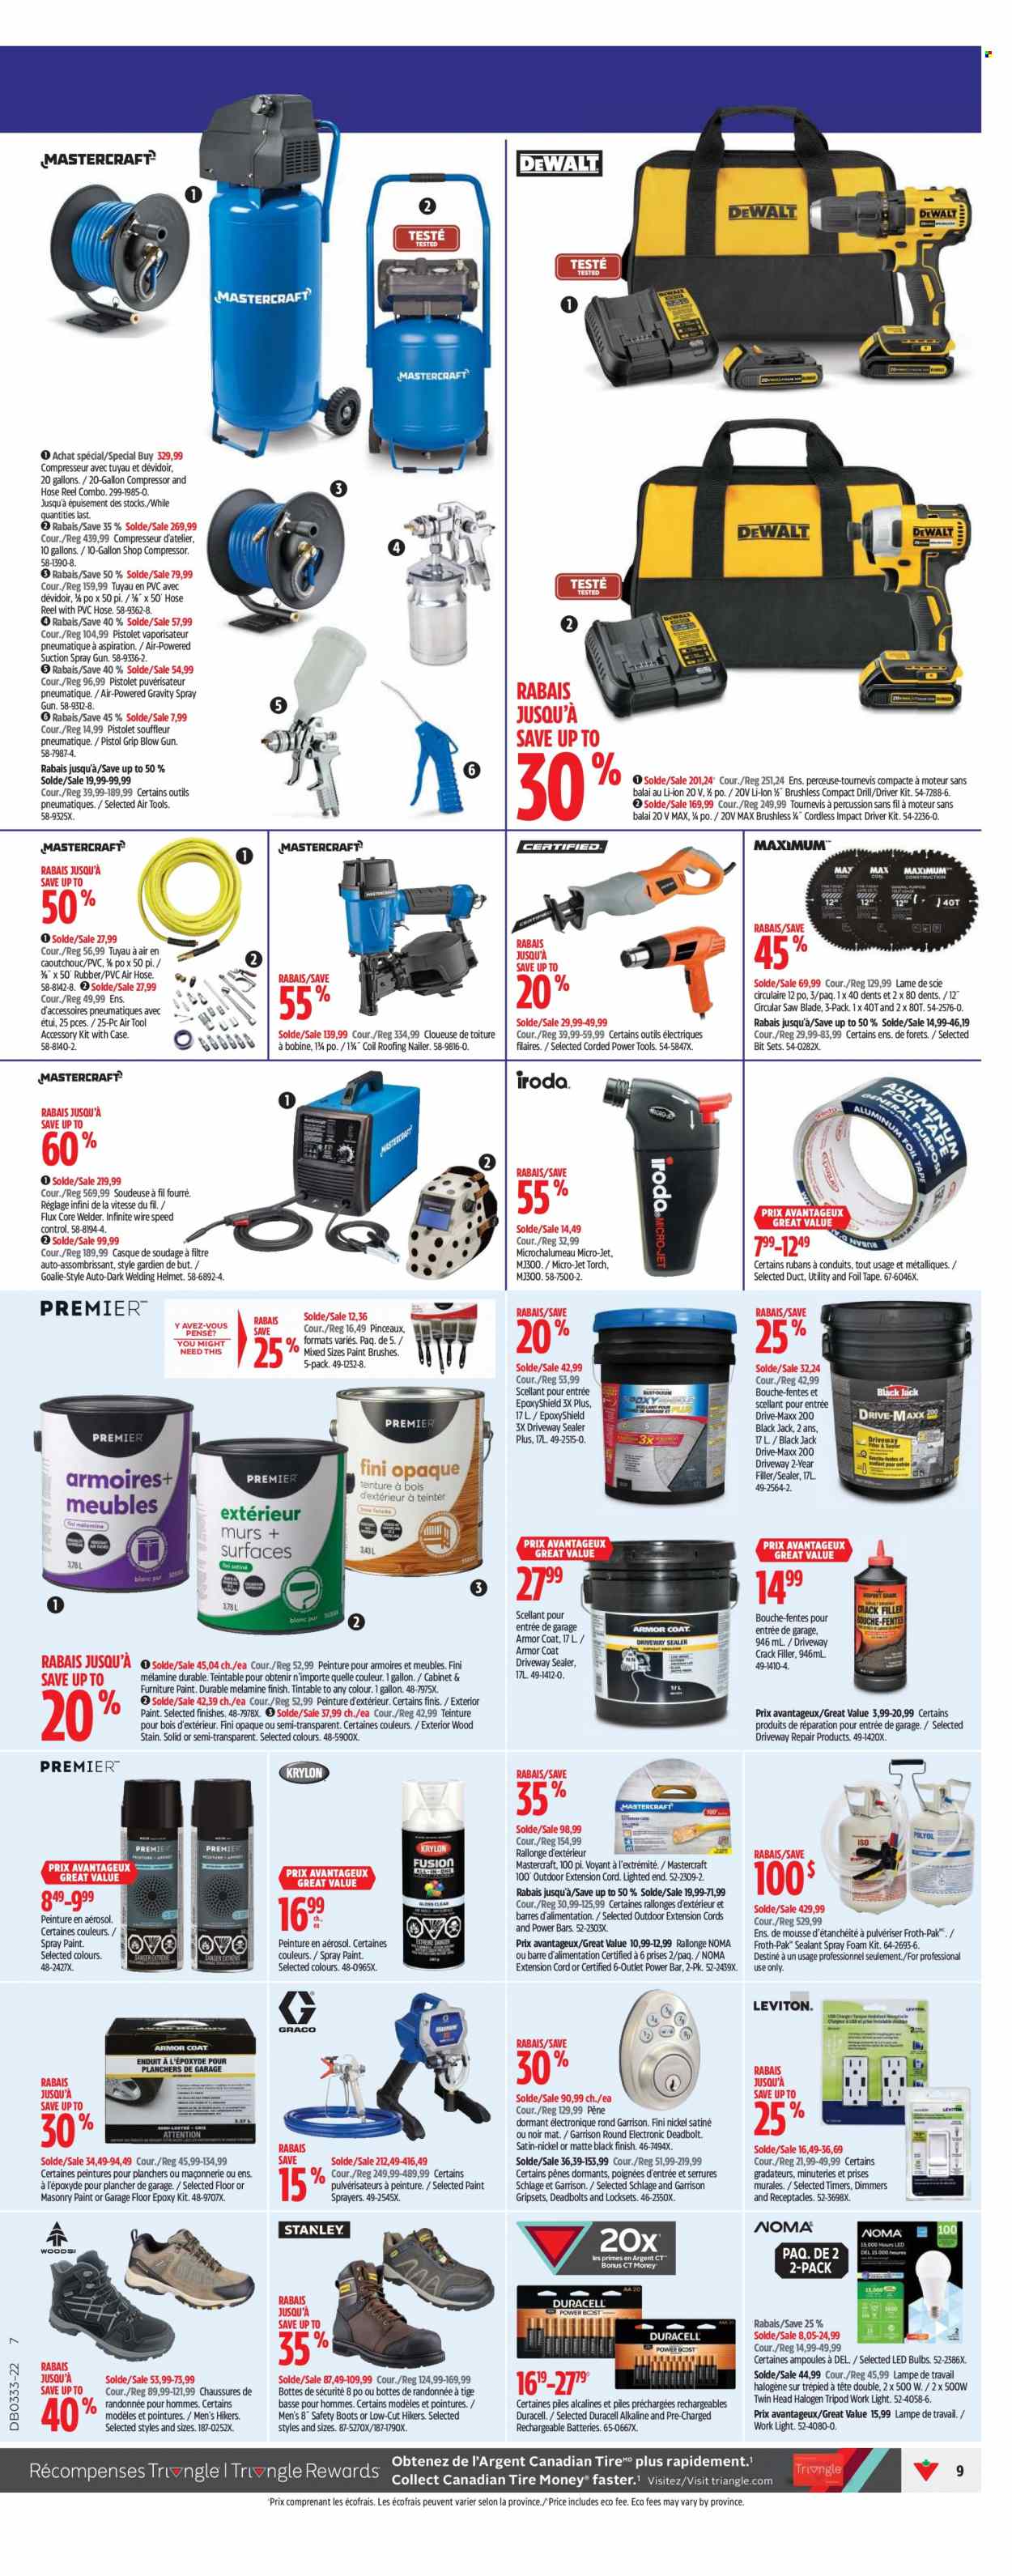 thumbnail - Canadian Tire Flyer - August 11, 2022 - August 17, 2022 - Sales products - Jet, spray gun, paint brush, eraser, deco strips, bulb, Duracell, LED bulb, percussion instrument, cabinet, coat, boots, DeWALT, hiking shoes, torch, spray paint, Stanley, lockset, tripod, electronic deadbolt, impact driver, power tools, circular saw blade, circular saw, saw, air compressor, welding helmet, extension cord, nailer, air hose, welder, hose reel. Page 9.